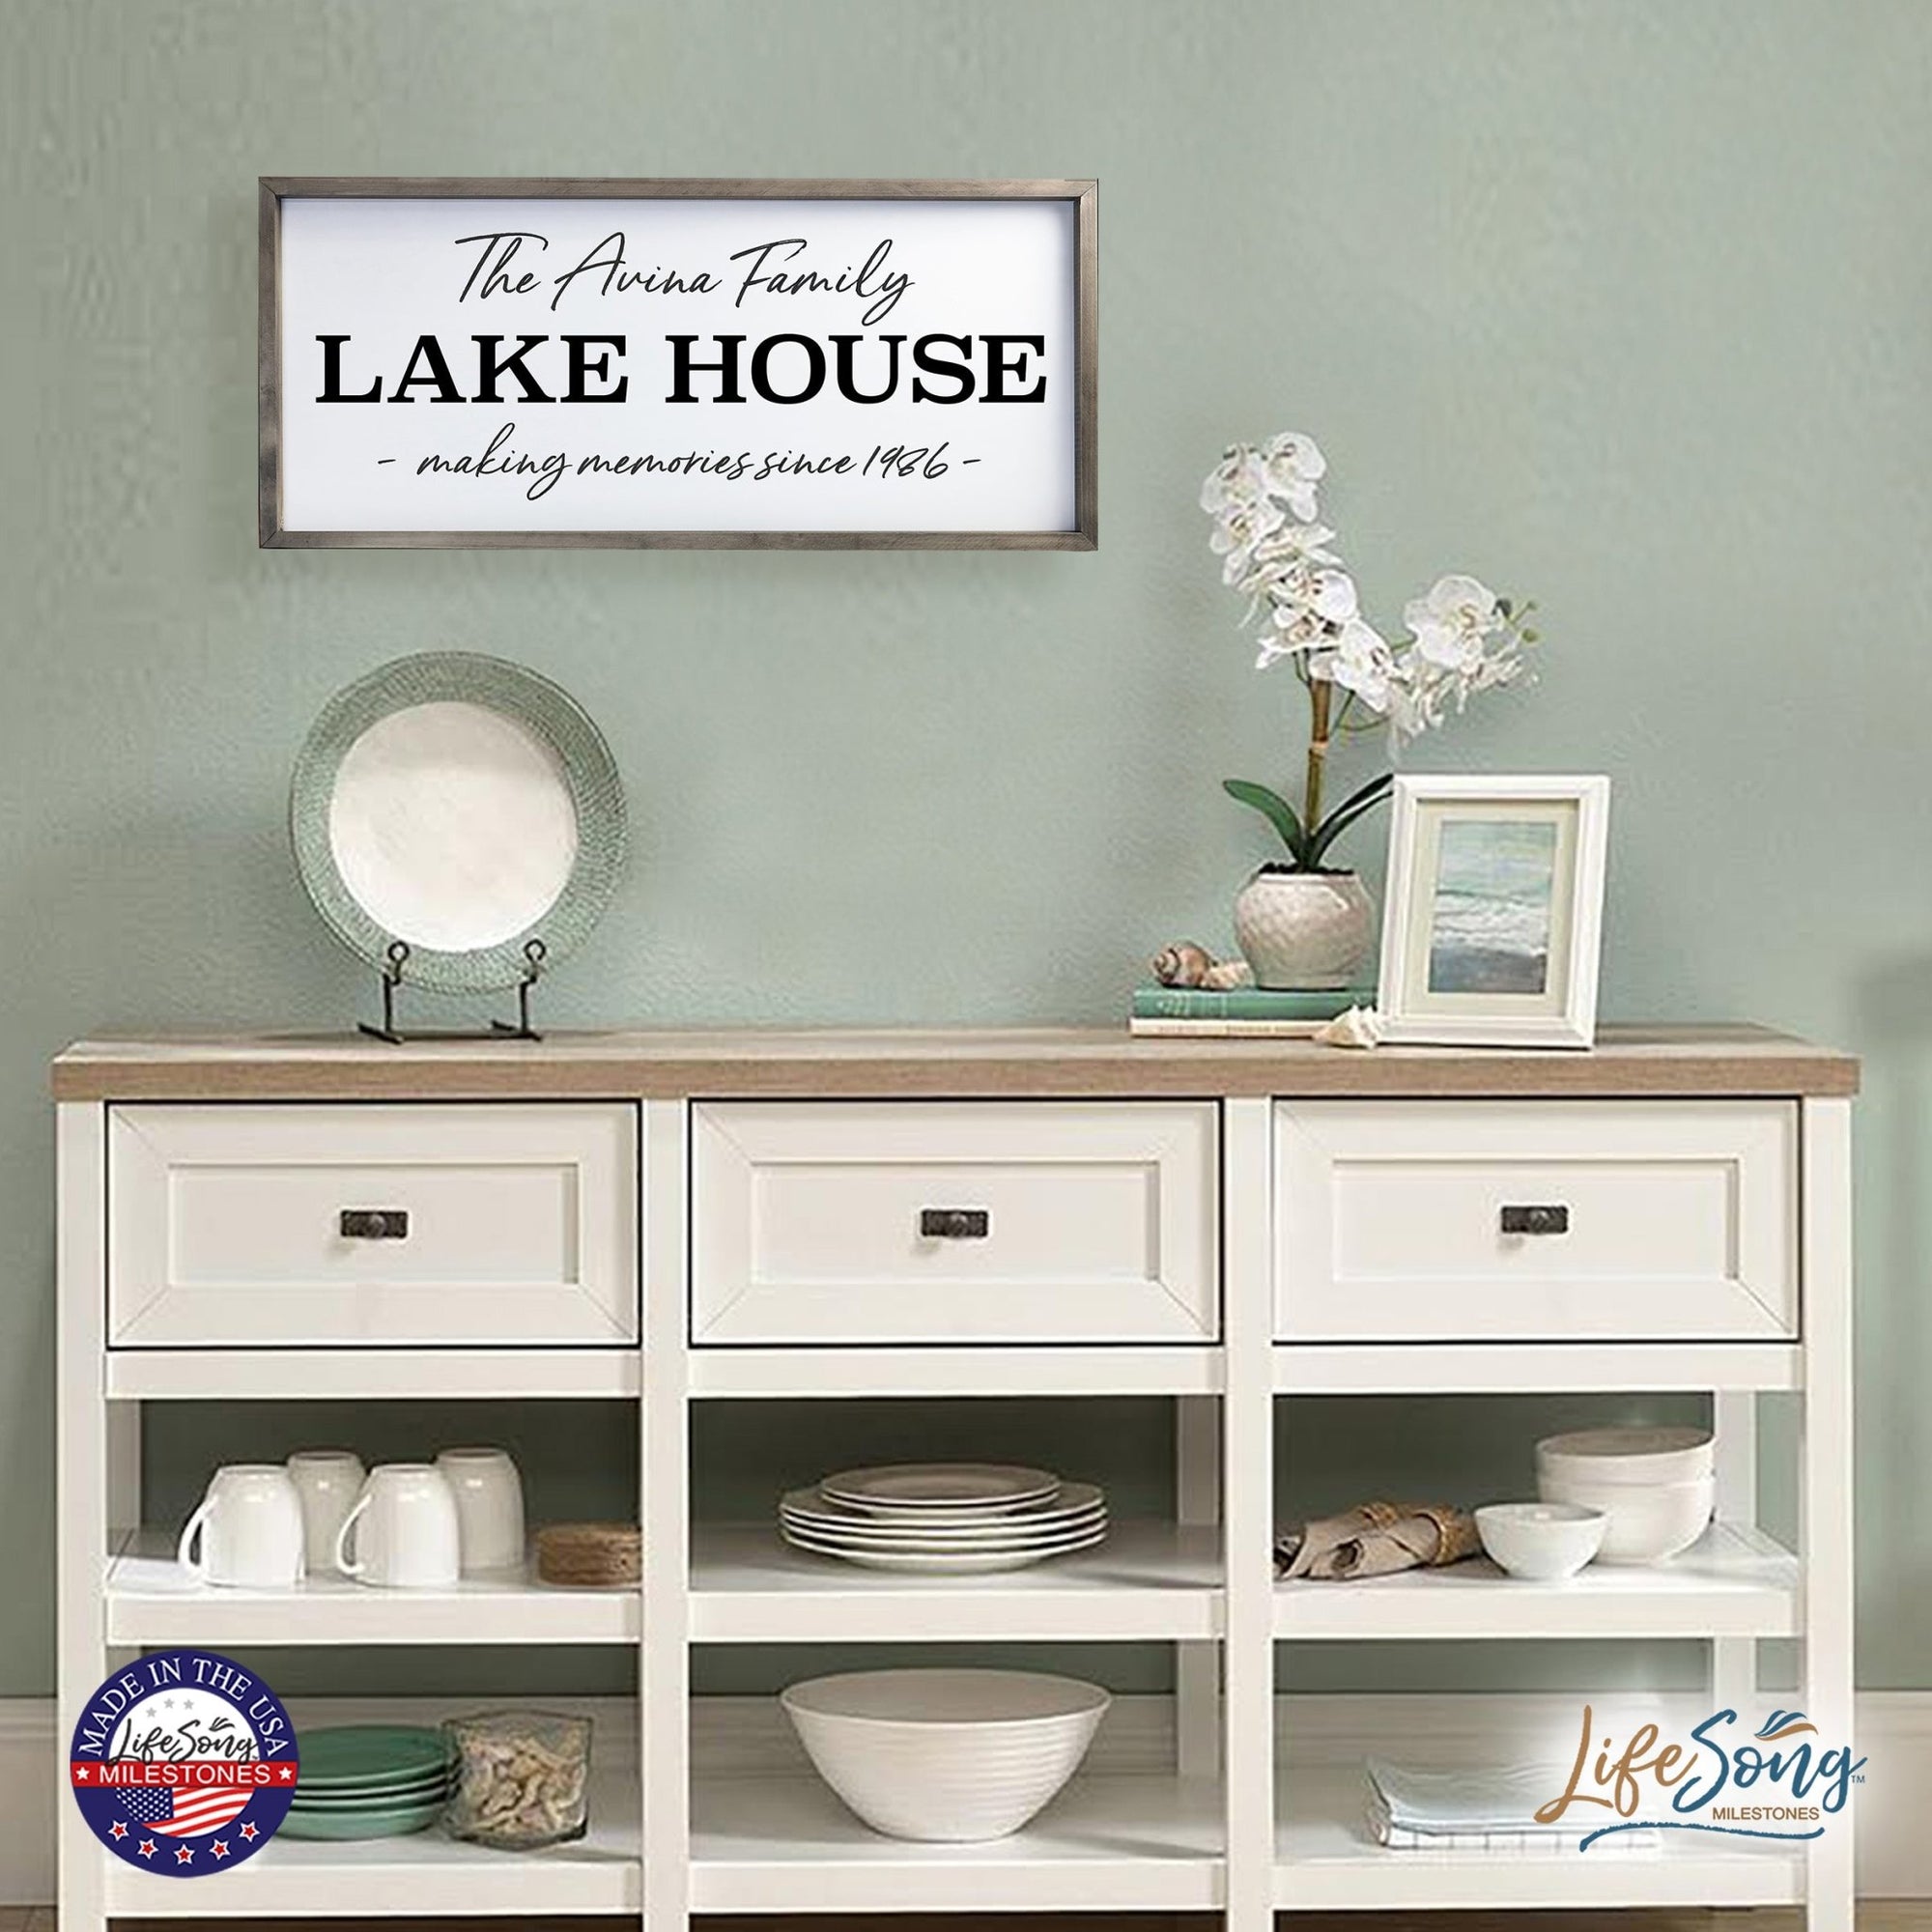 Inspirational Personalized Framed Shadow Box 13x30 - The Lake House Making Memories - LifeSong Milestones